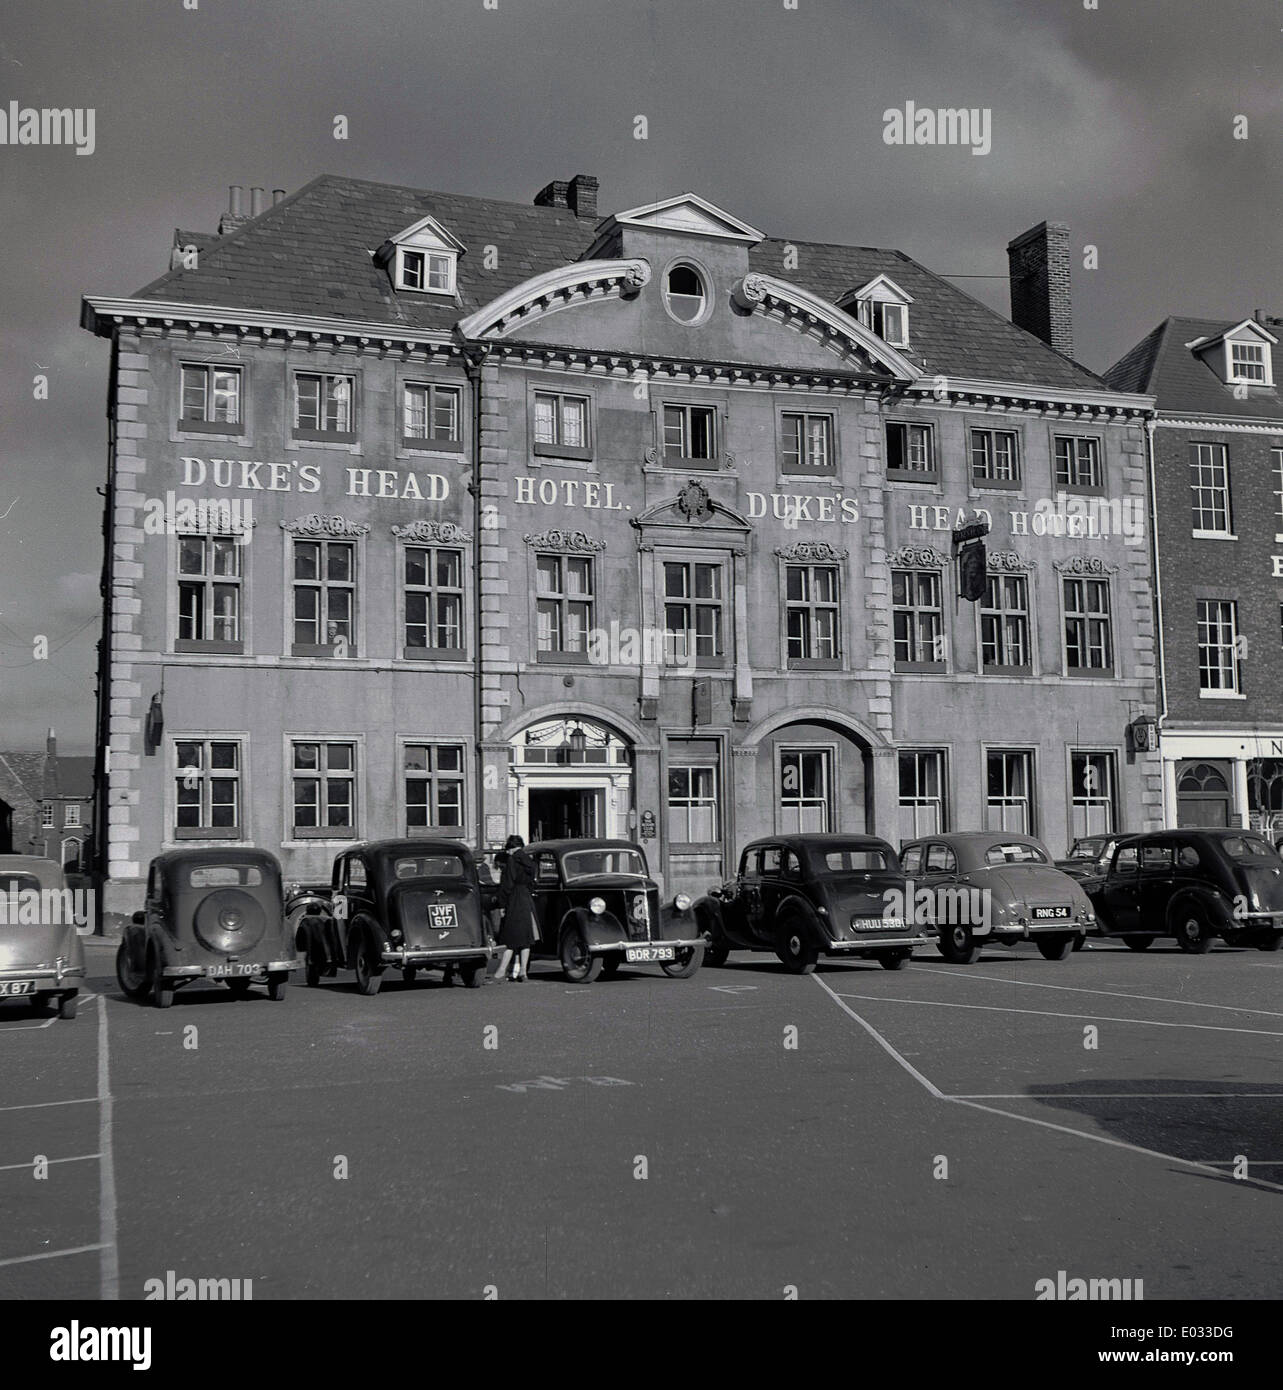 1950s. Historical picture showing the exterior of The Duke's Head Hotel, King's Lynn, Norfolk, England with cars in foreground. Stock Photo